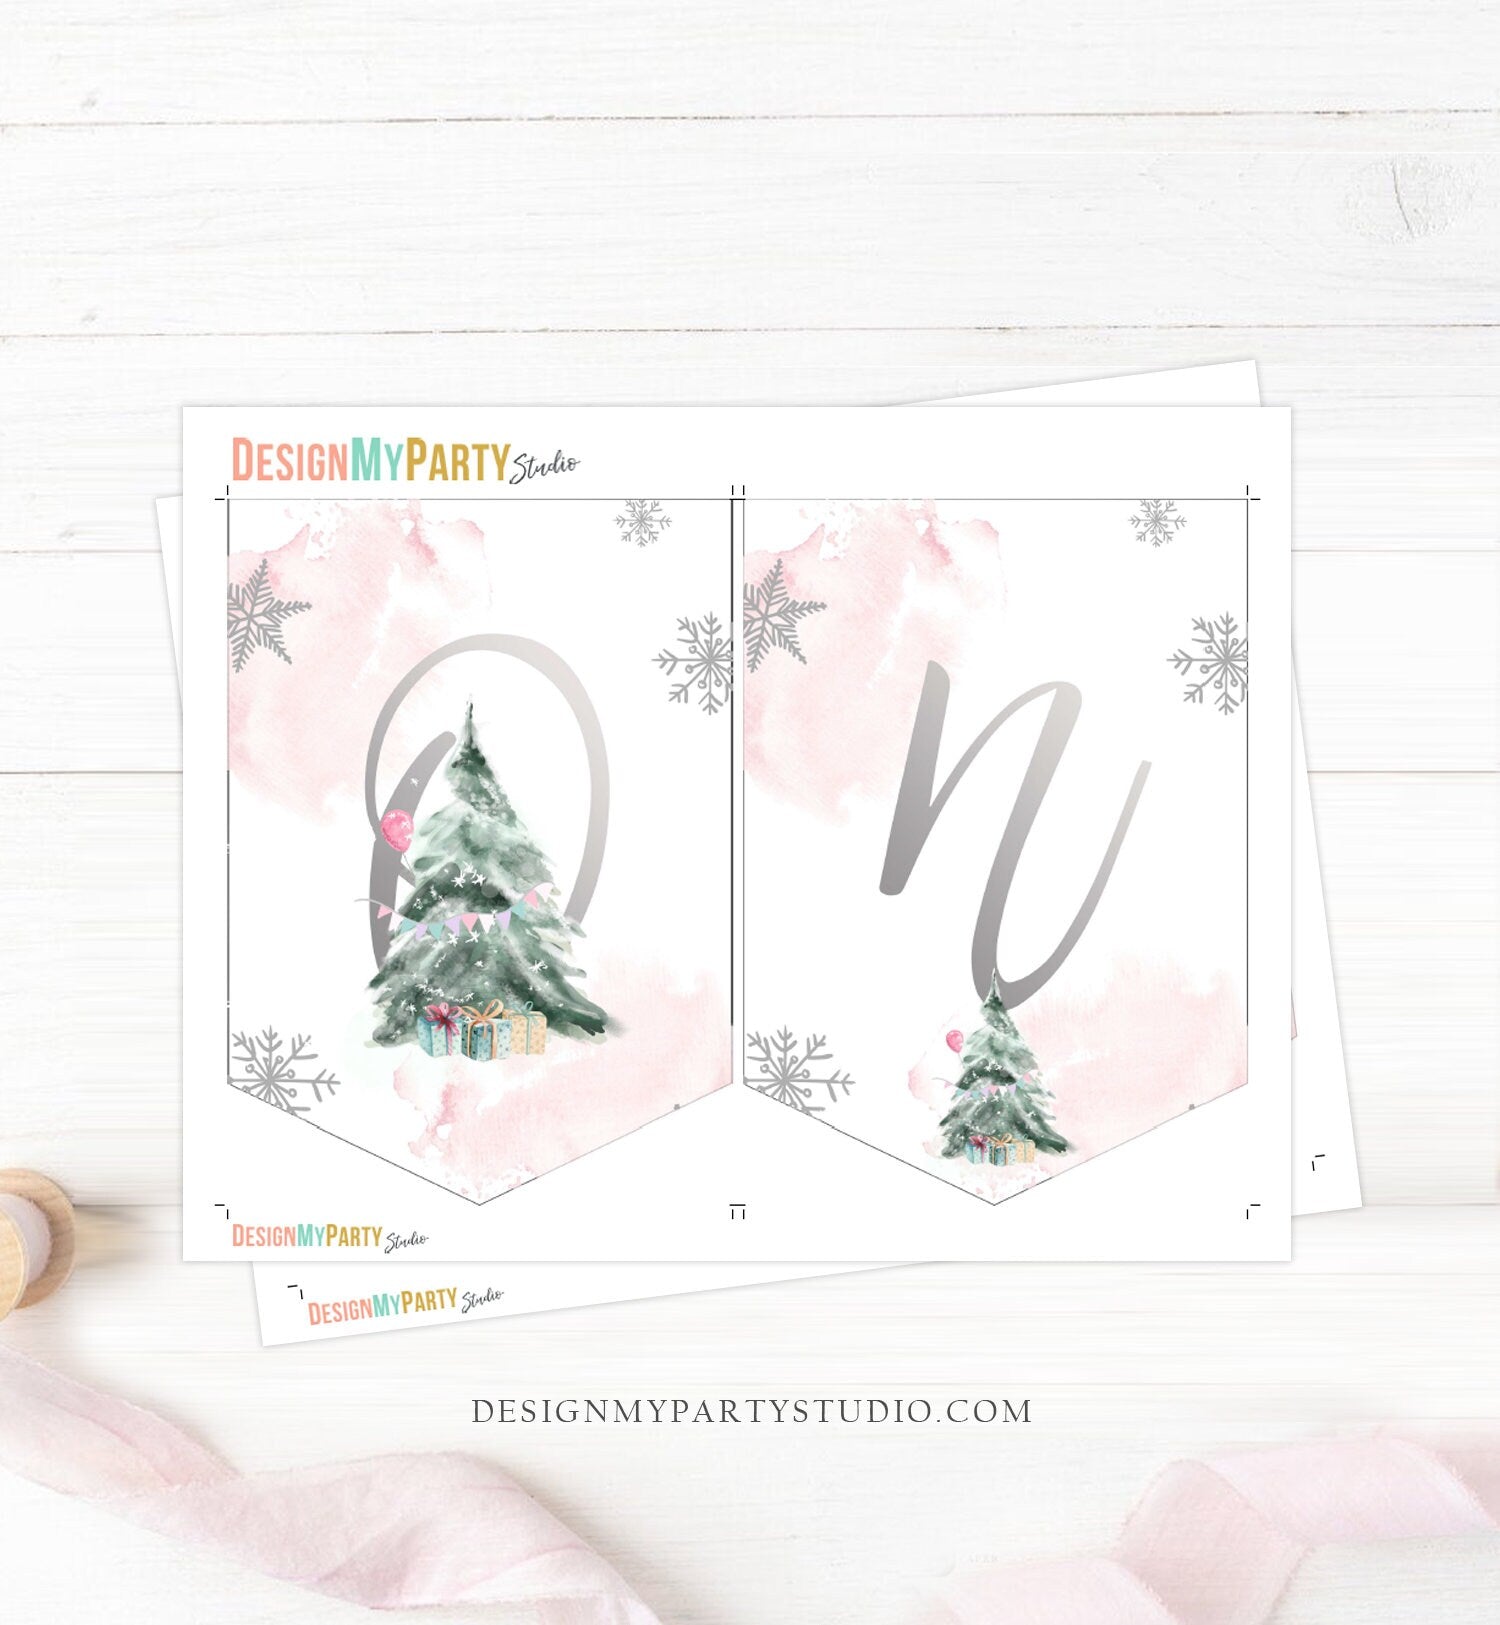 One High Chair Banner Winter Onederland Girl 1st First Birthday Pink Christmas Birthday Oh What Fun ONE Tree Decor PRINTABLE Digital 0363